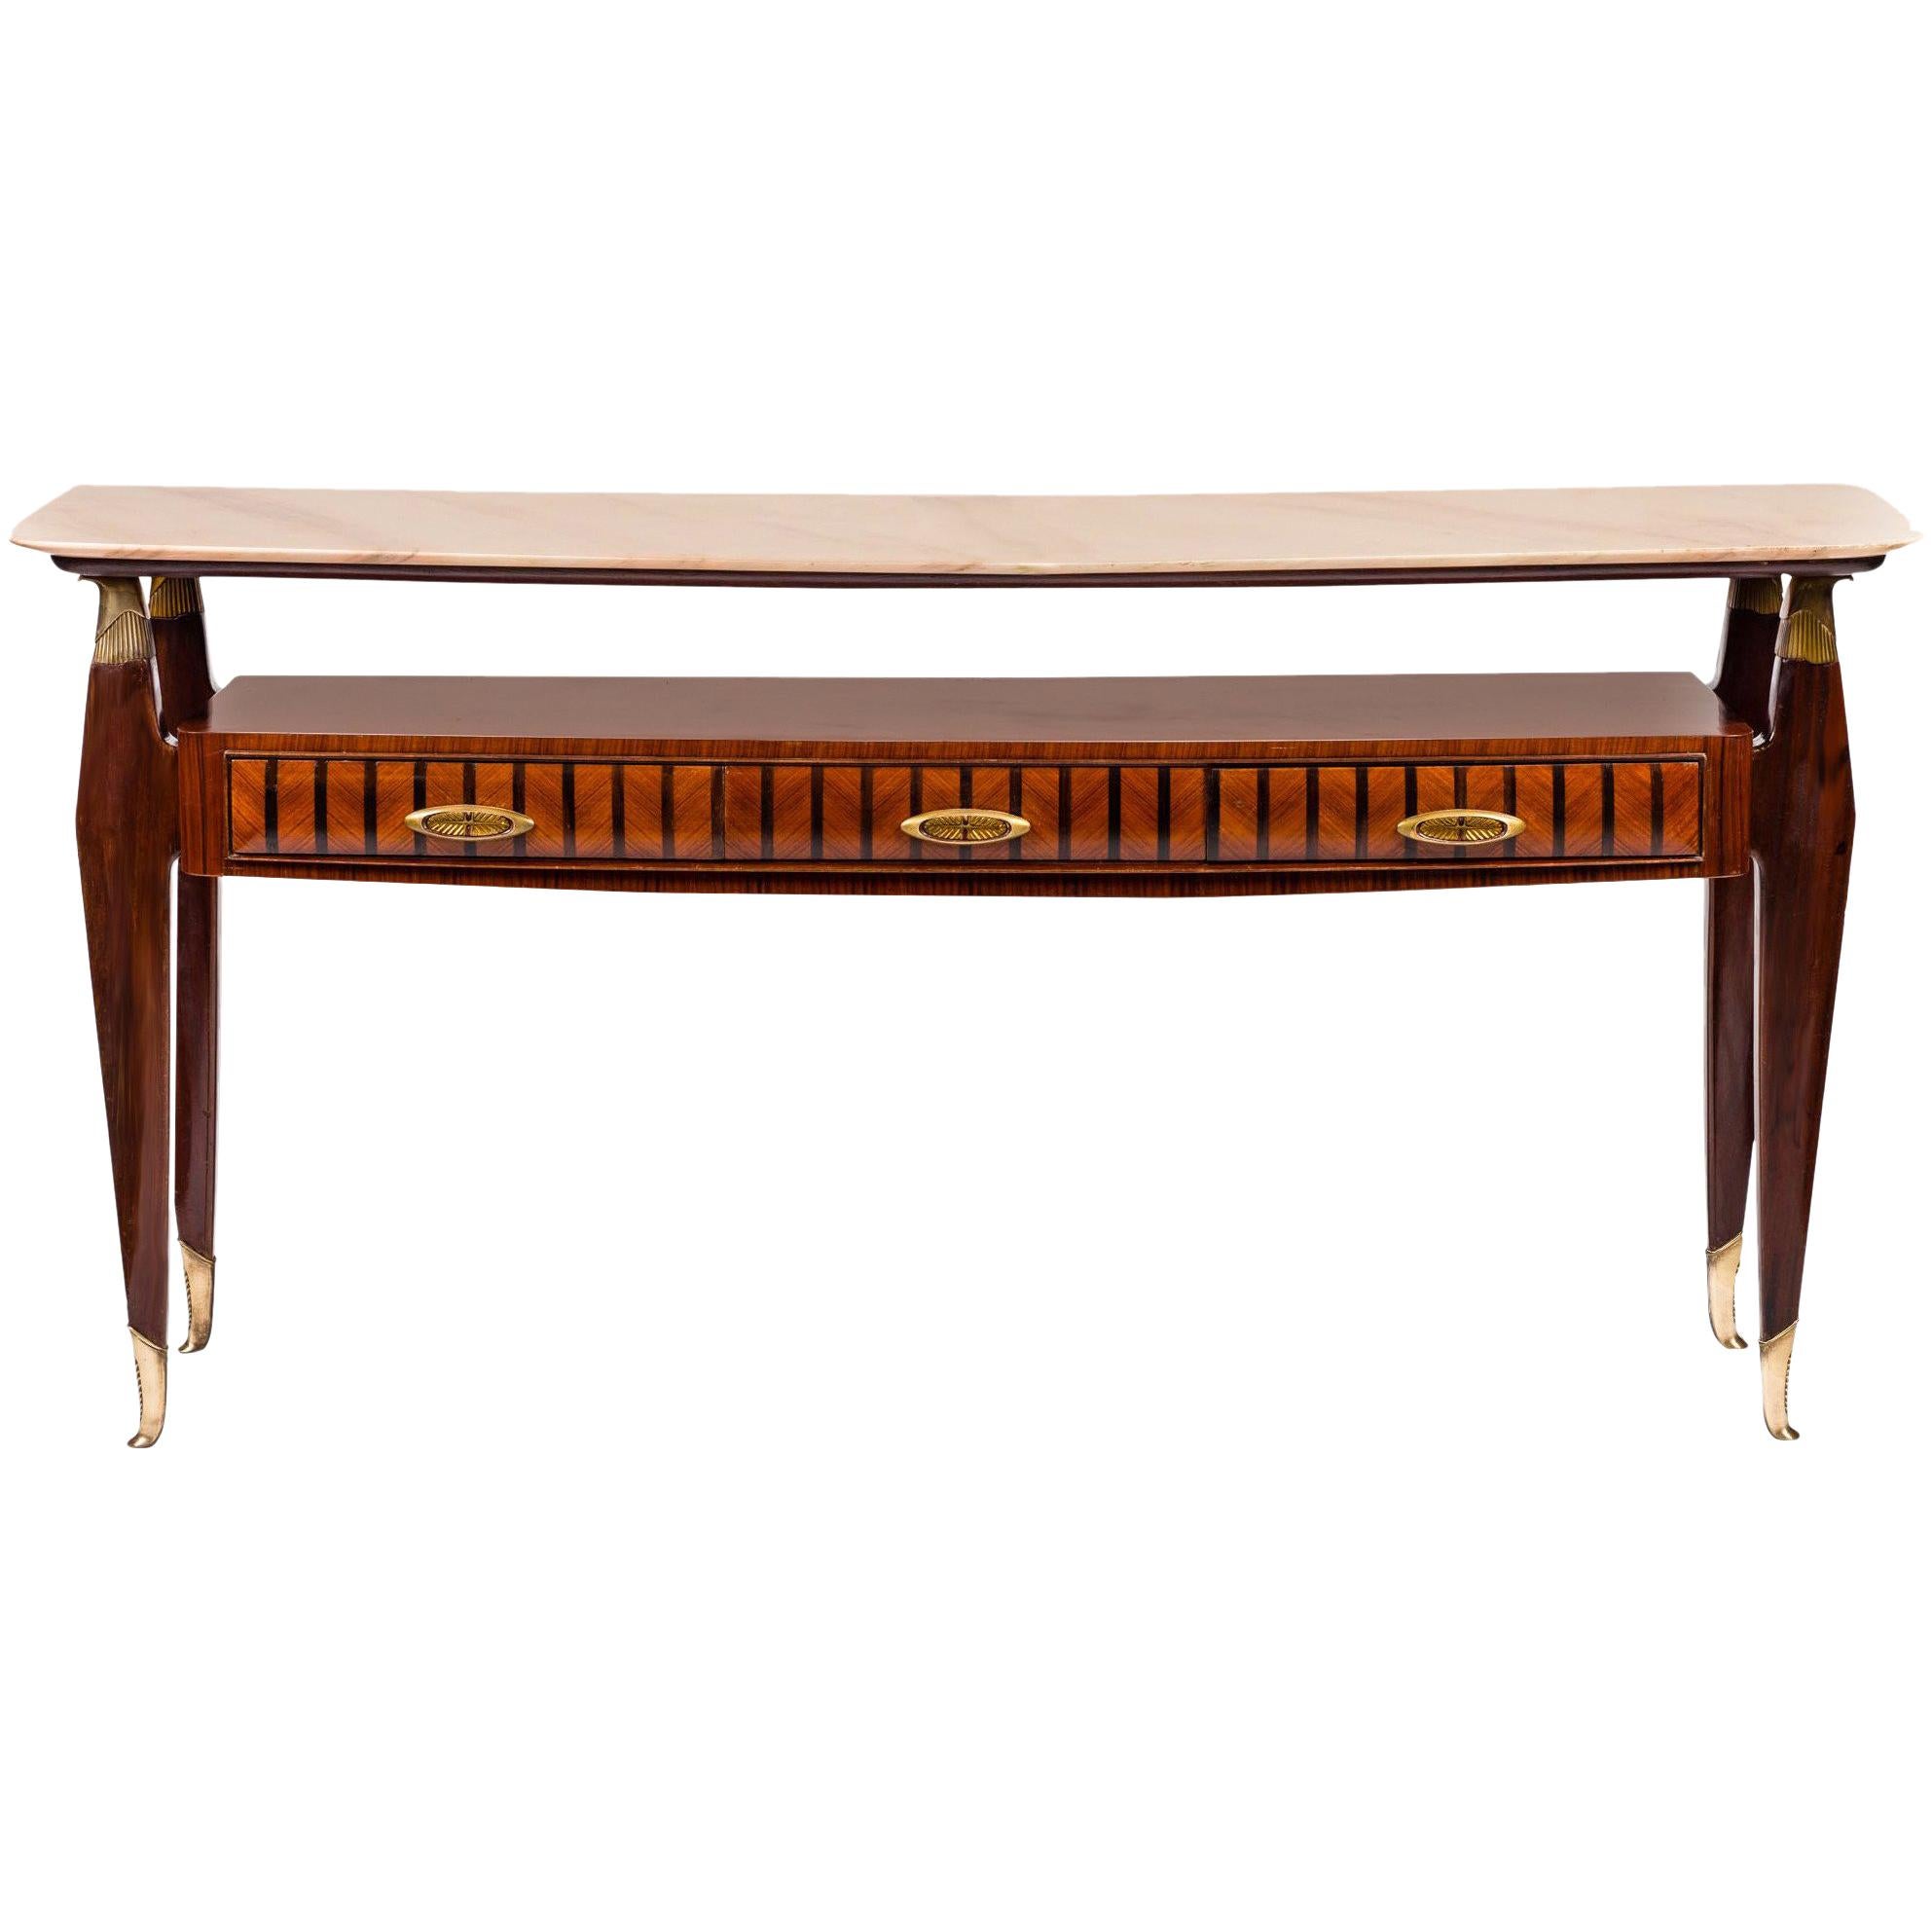 Italian Design Midcentury Console Table in the Style of Paolo Buffa, 1950s